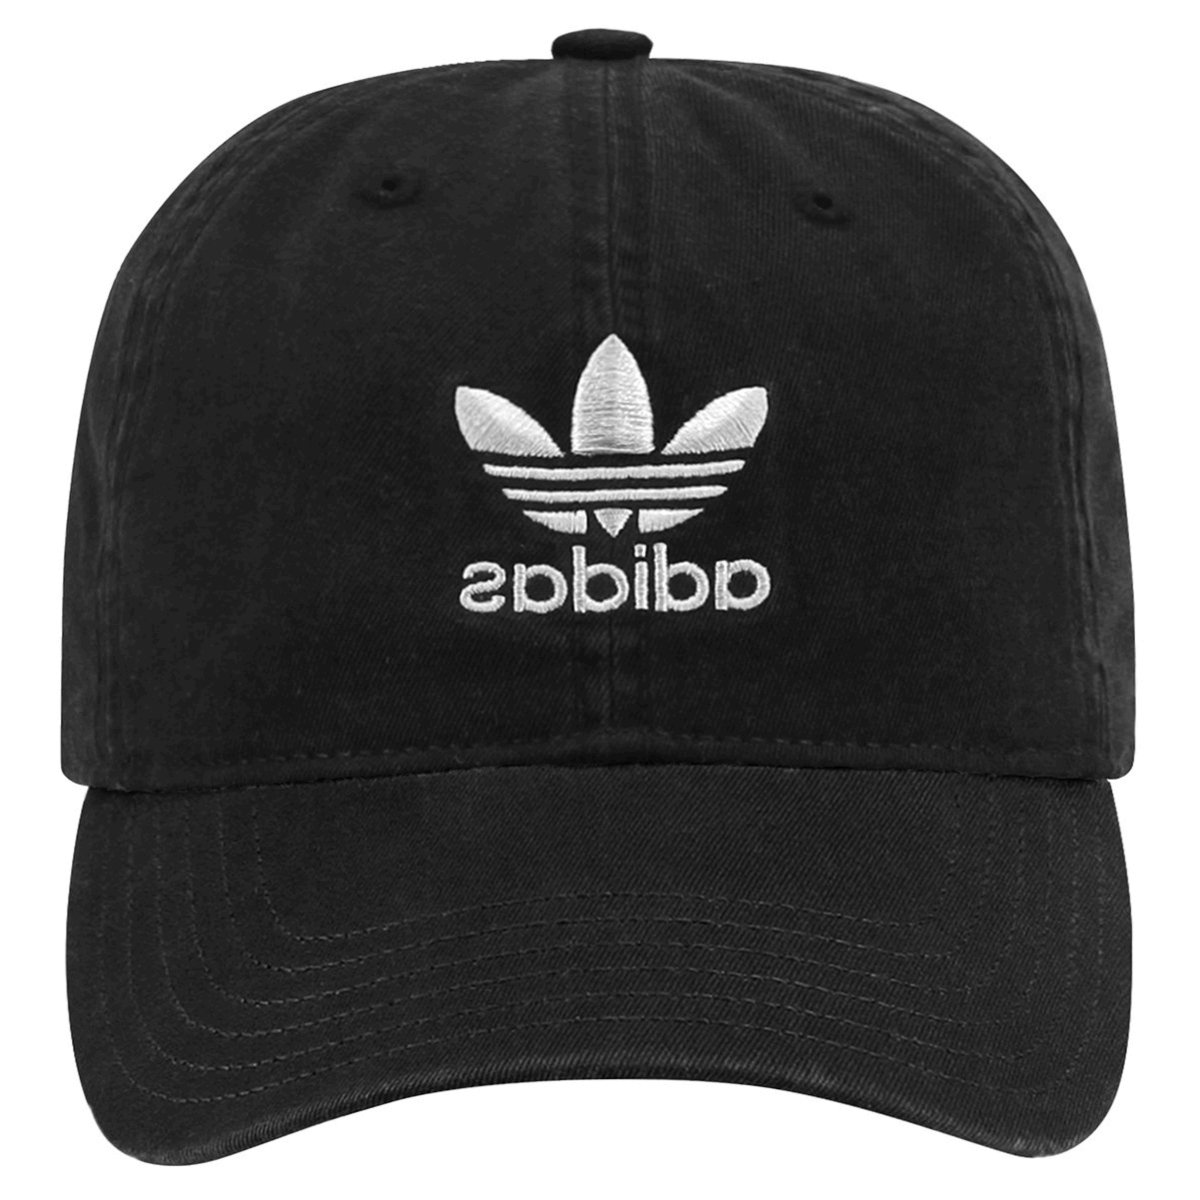 adidas Women's Originals Relaxed Fit Cap, One Size,, Black/Black, Size ...